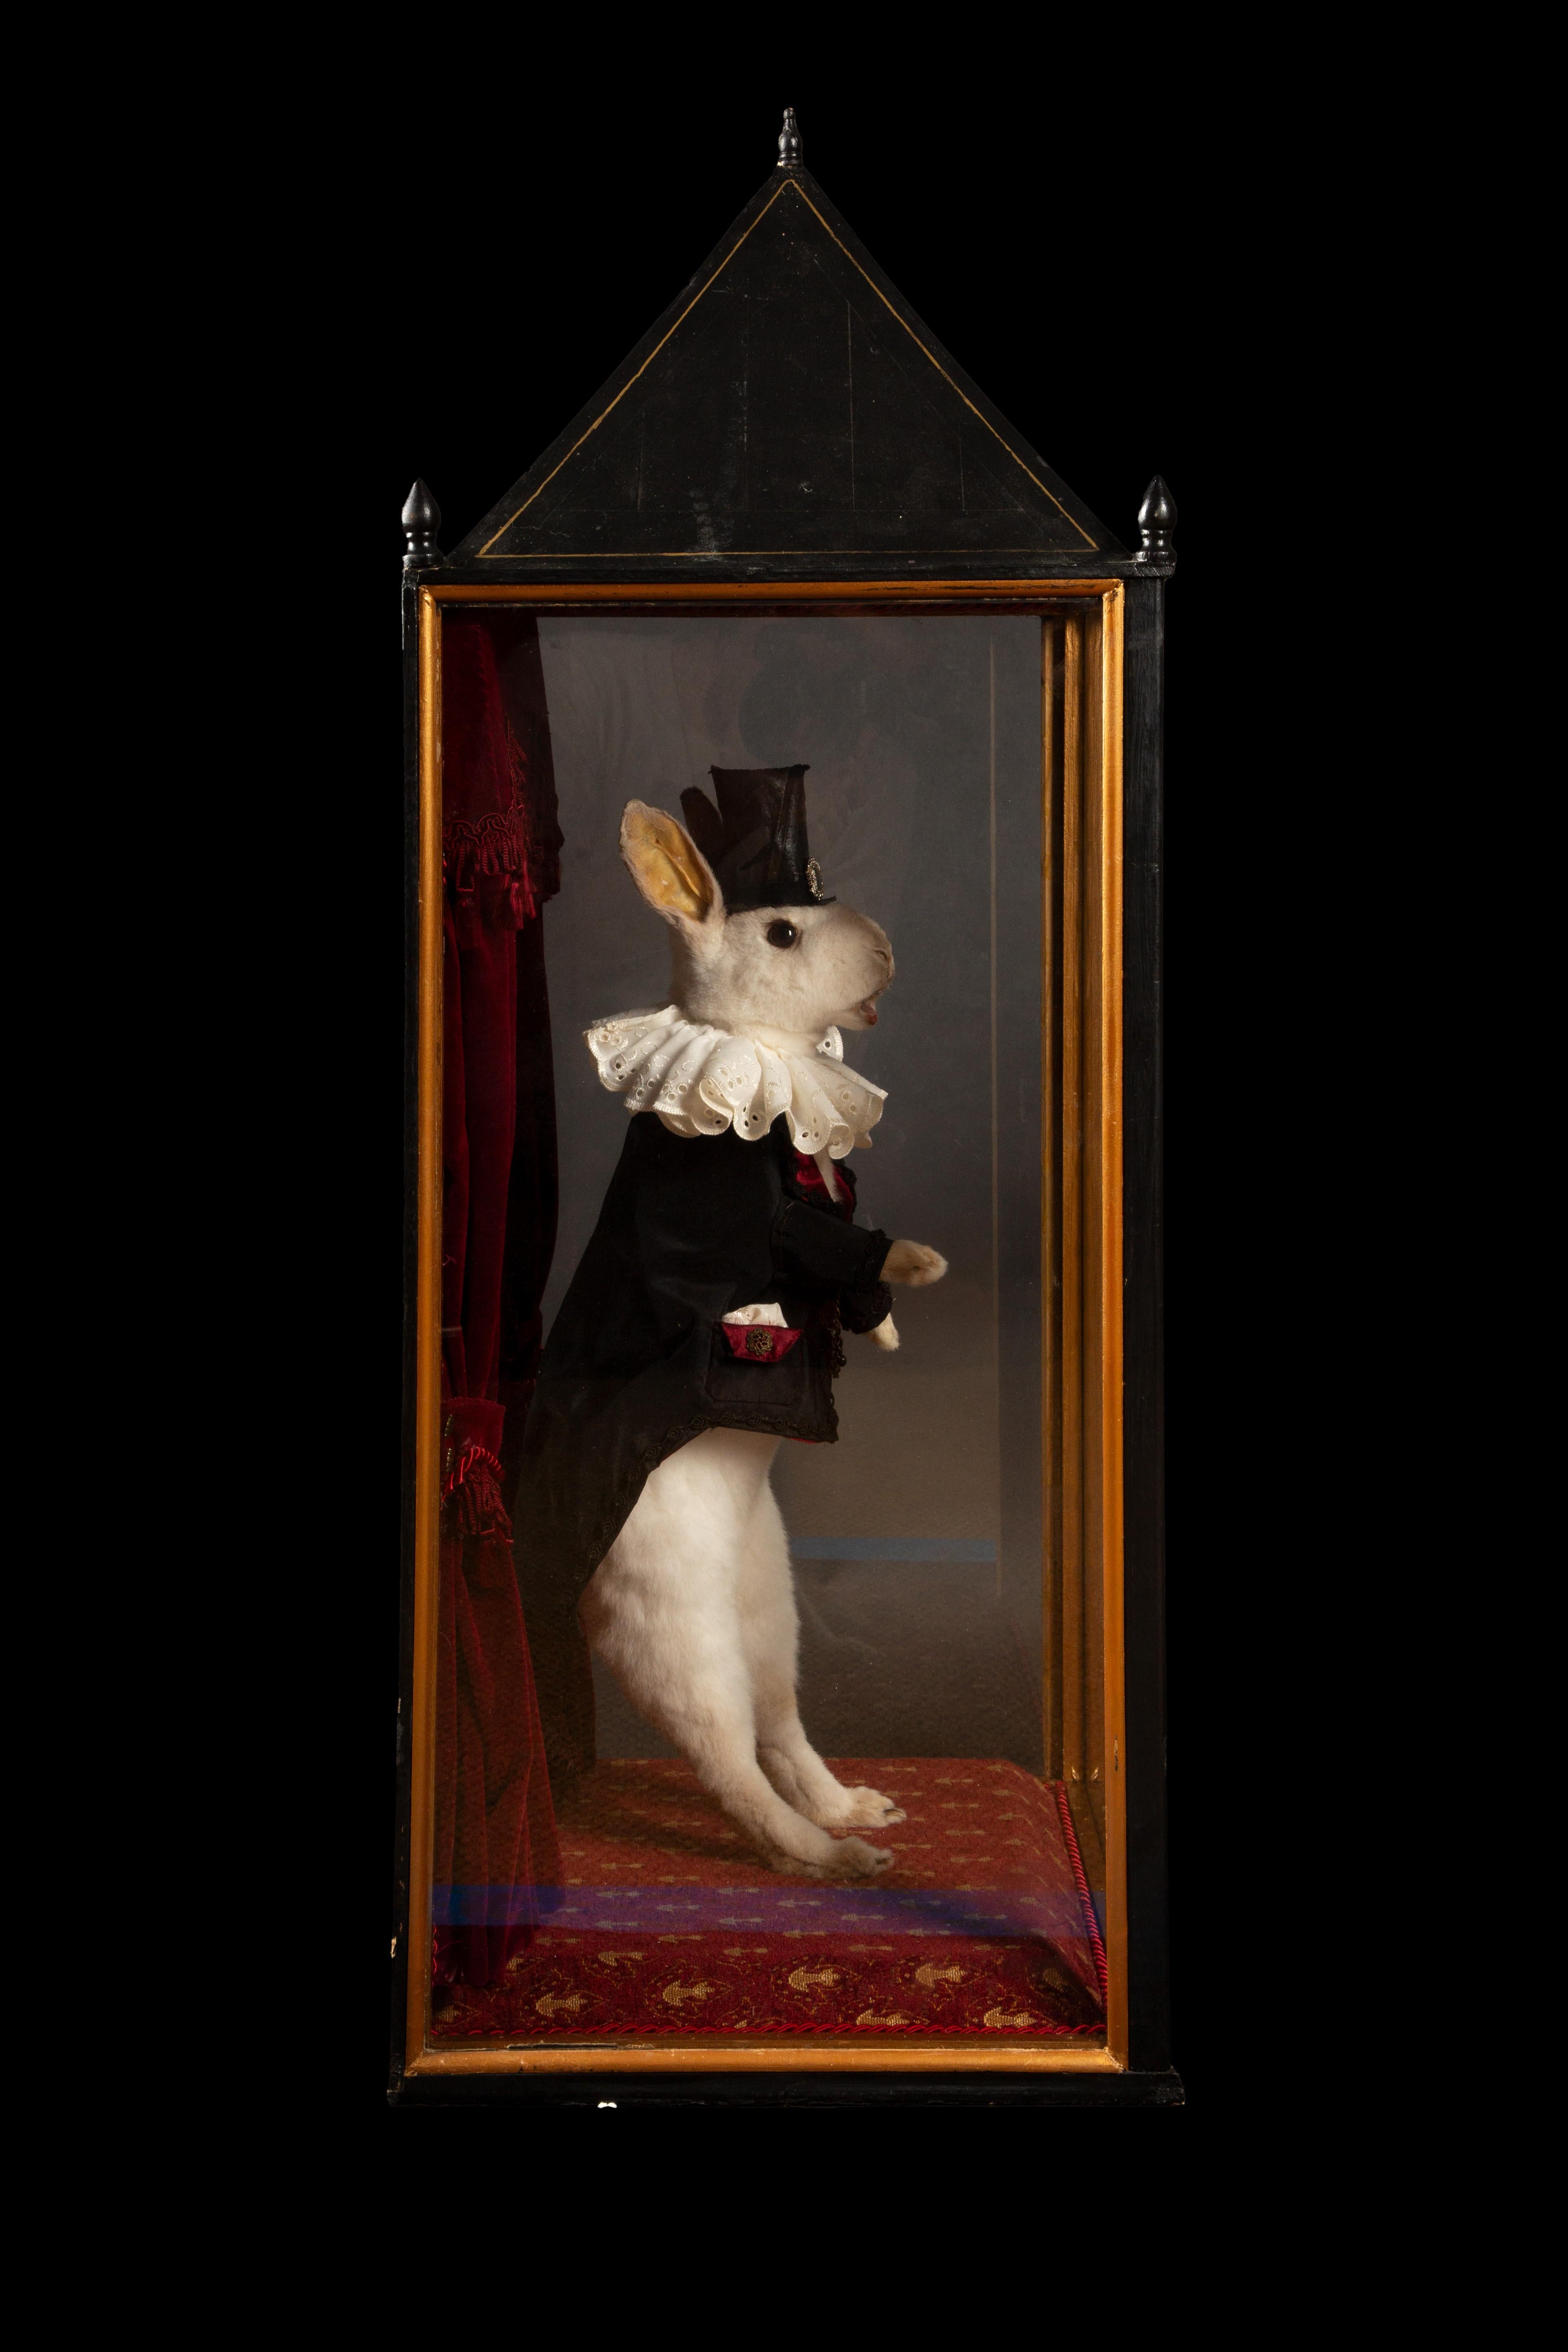 American Enchanted Illusions: Taxidermy Magician Rabbit Diorama For Sale